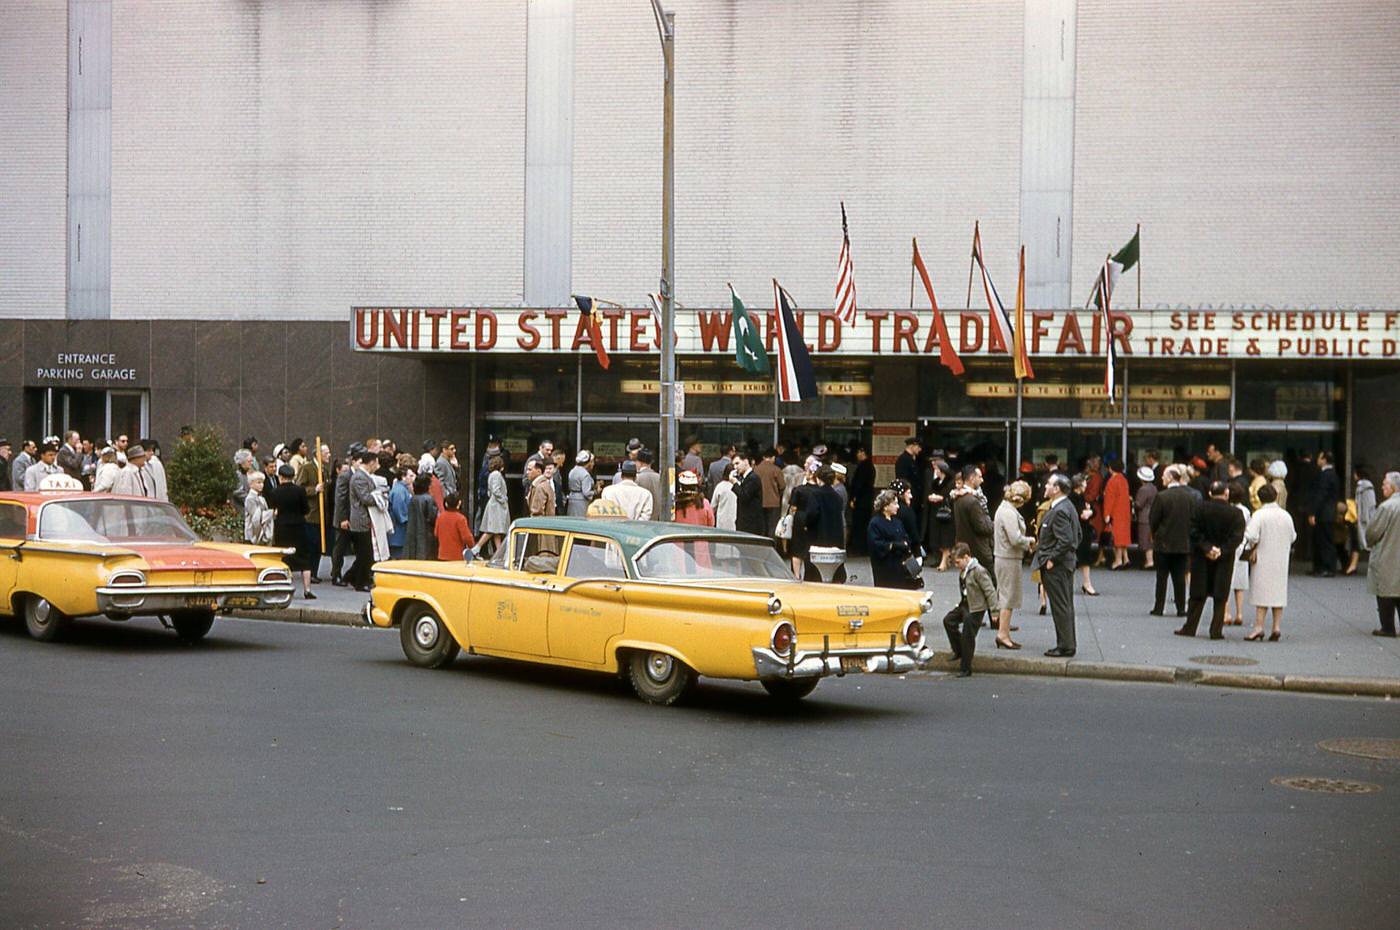 Crowd Gathered In Front Of The New York Coliseum In Columbus Circle, Manhattan, 1963